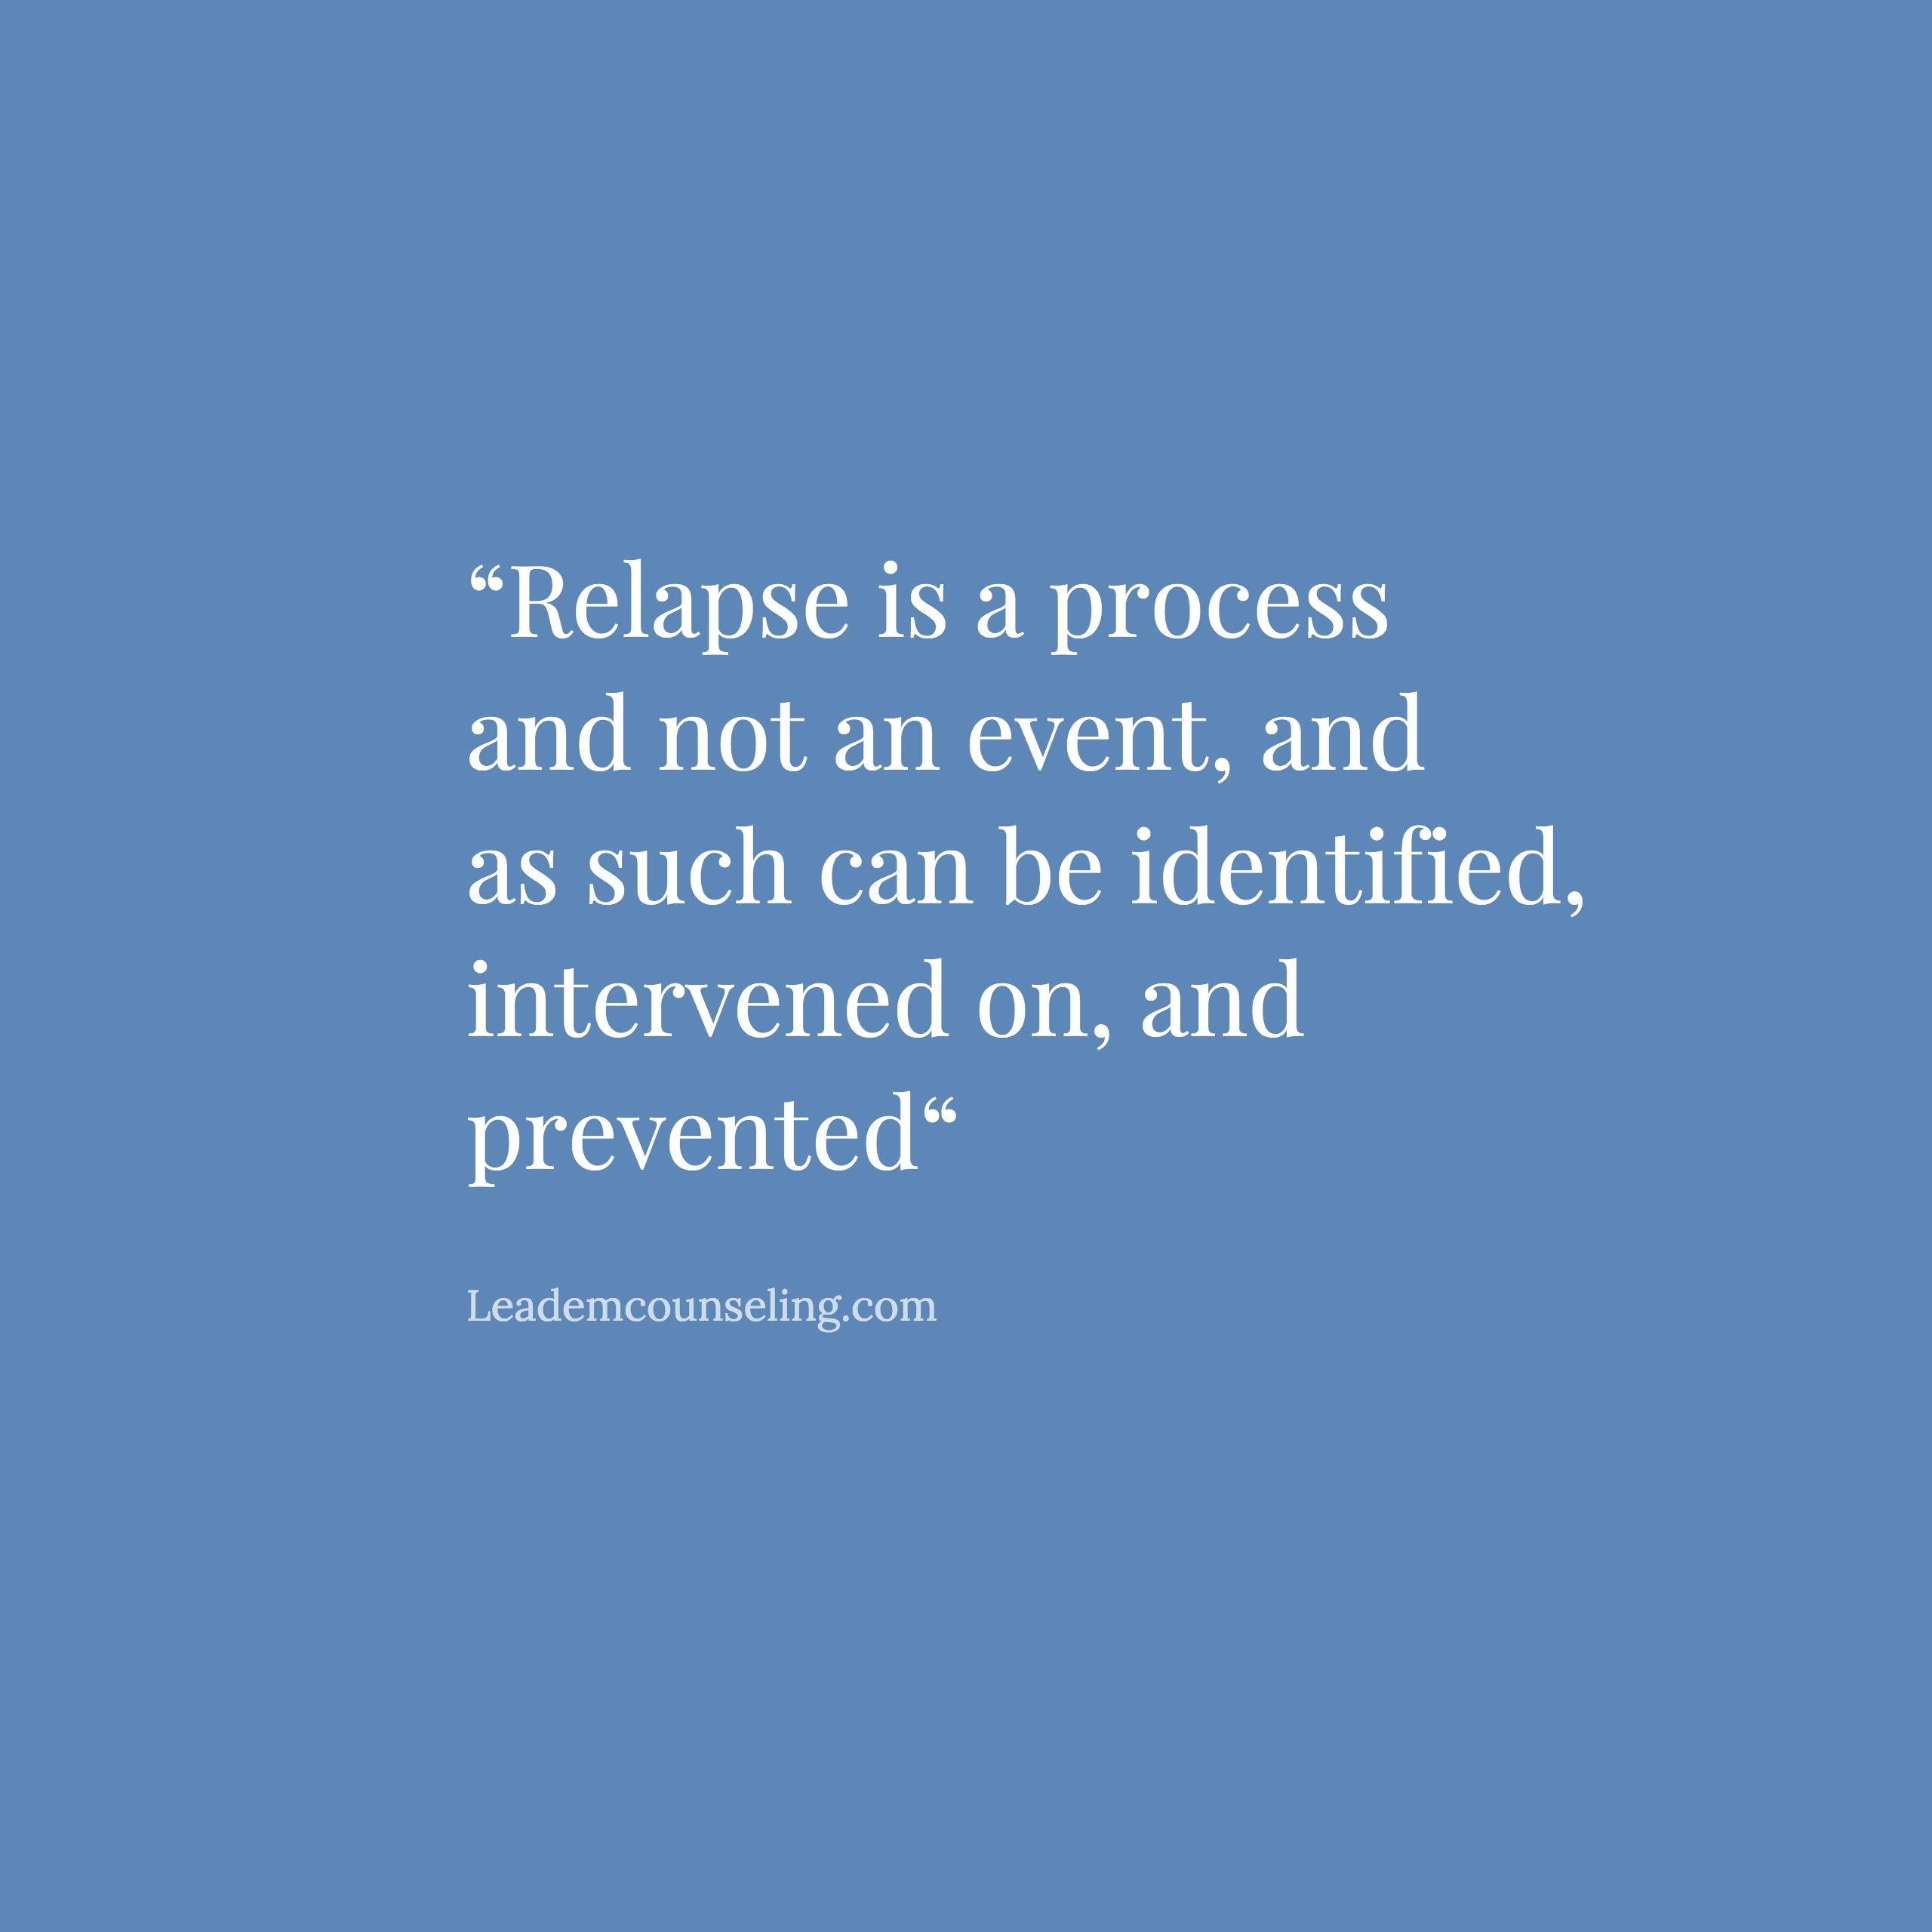 Relapse is a process and not an event, and as such can be identified, intervened on, and prevented